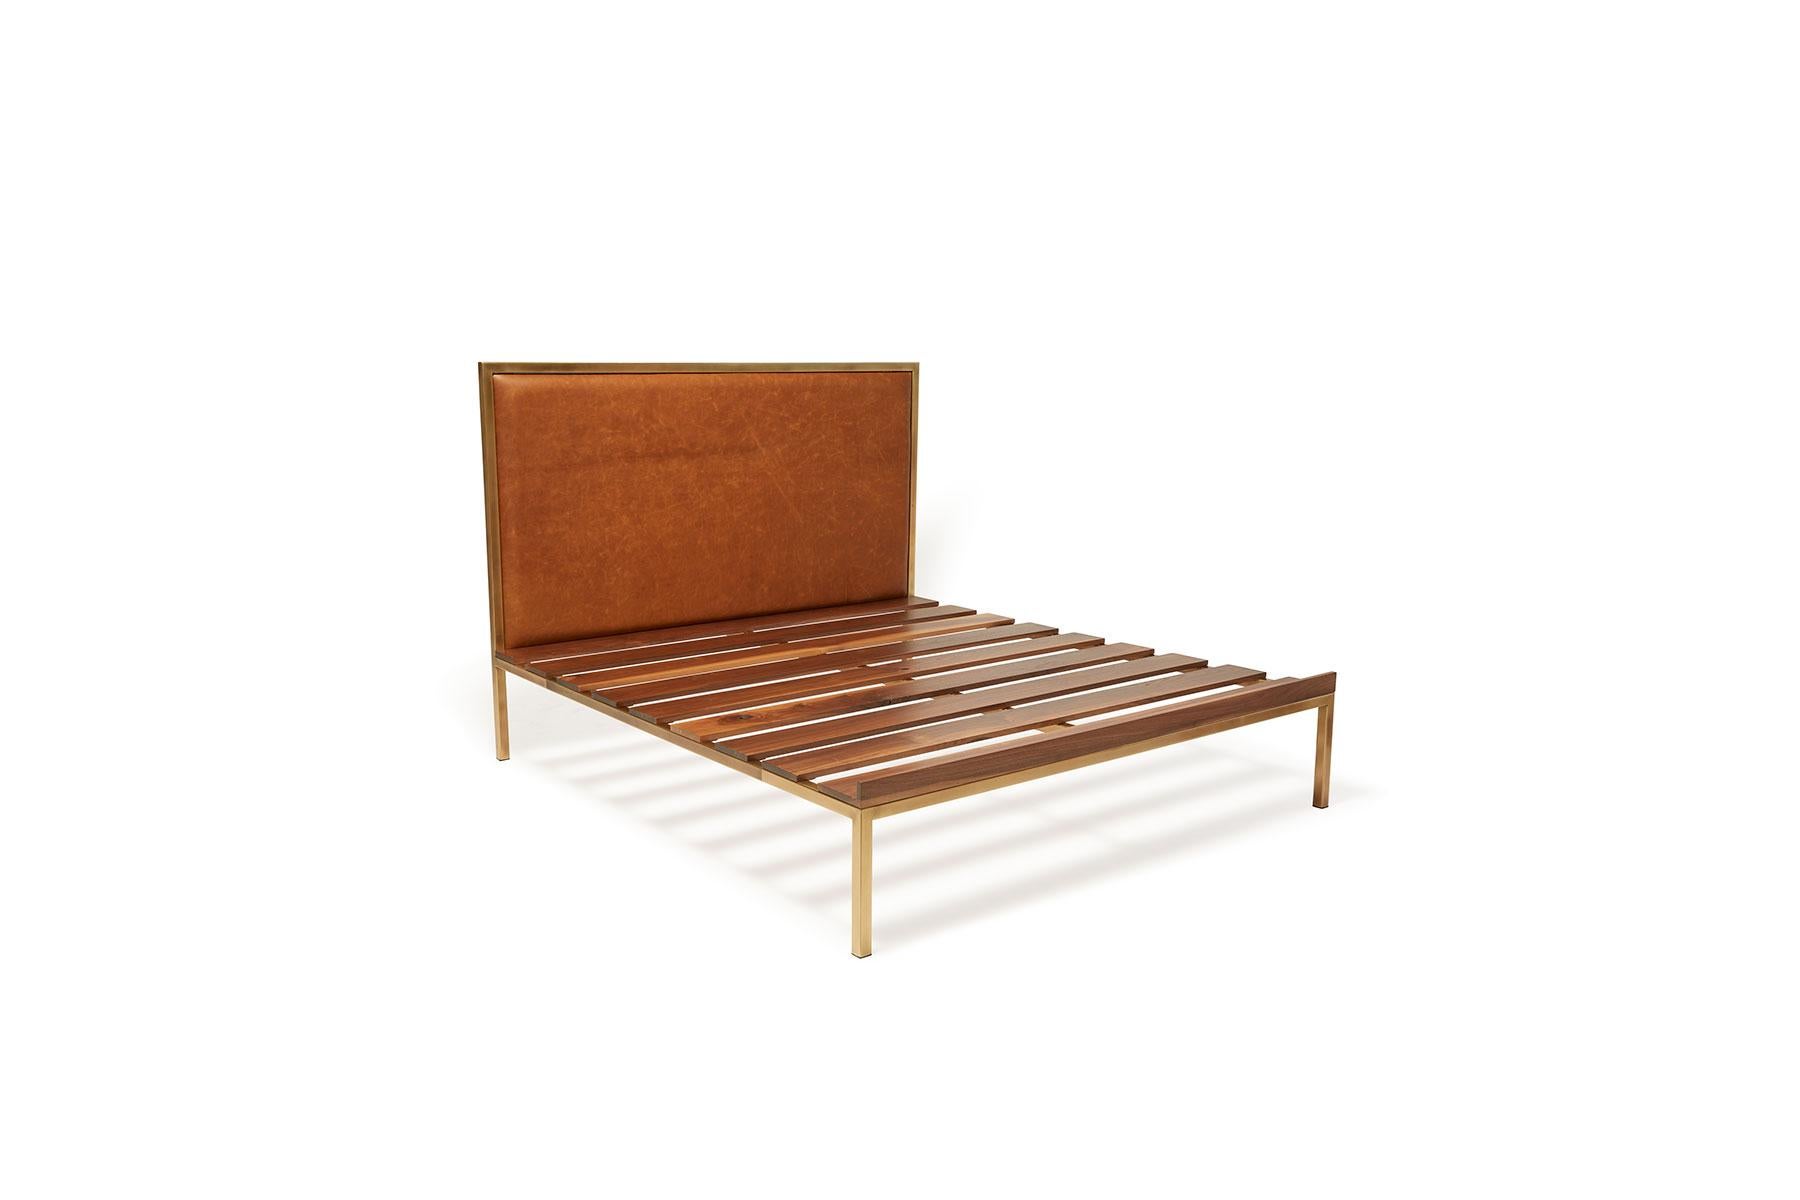 Rest with style in the Stephen Kenn Inheritance Bed. 

This minimalist variation does not feature the built-in bedside tables or bench. 

Beginning with an antique brass tubular steel frame, walnut wood slats are laid down the length of the